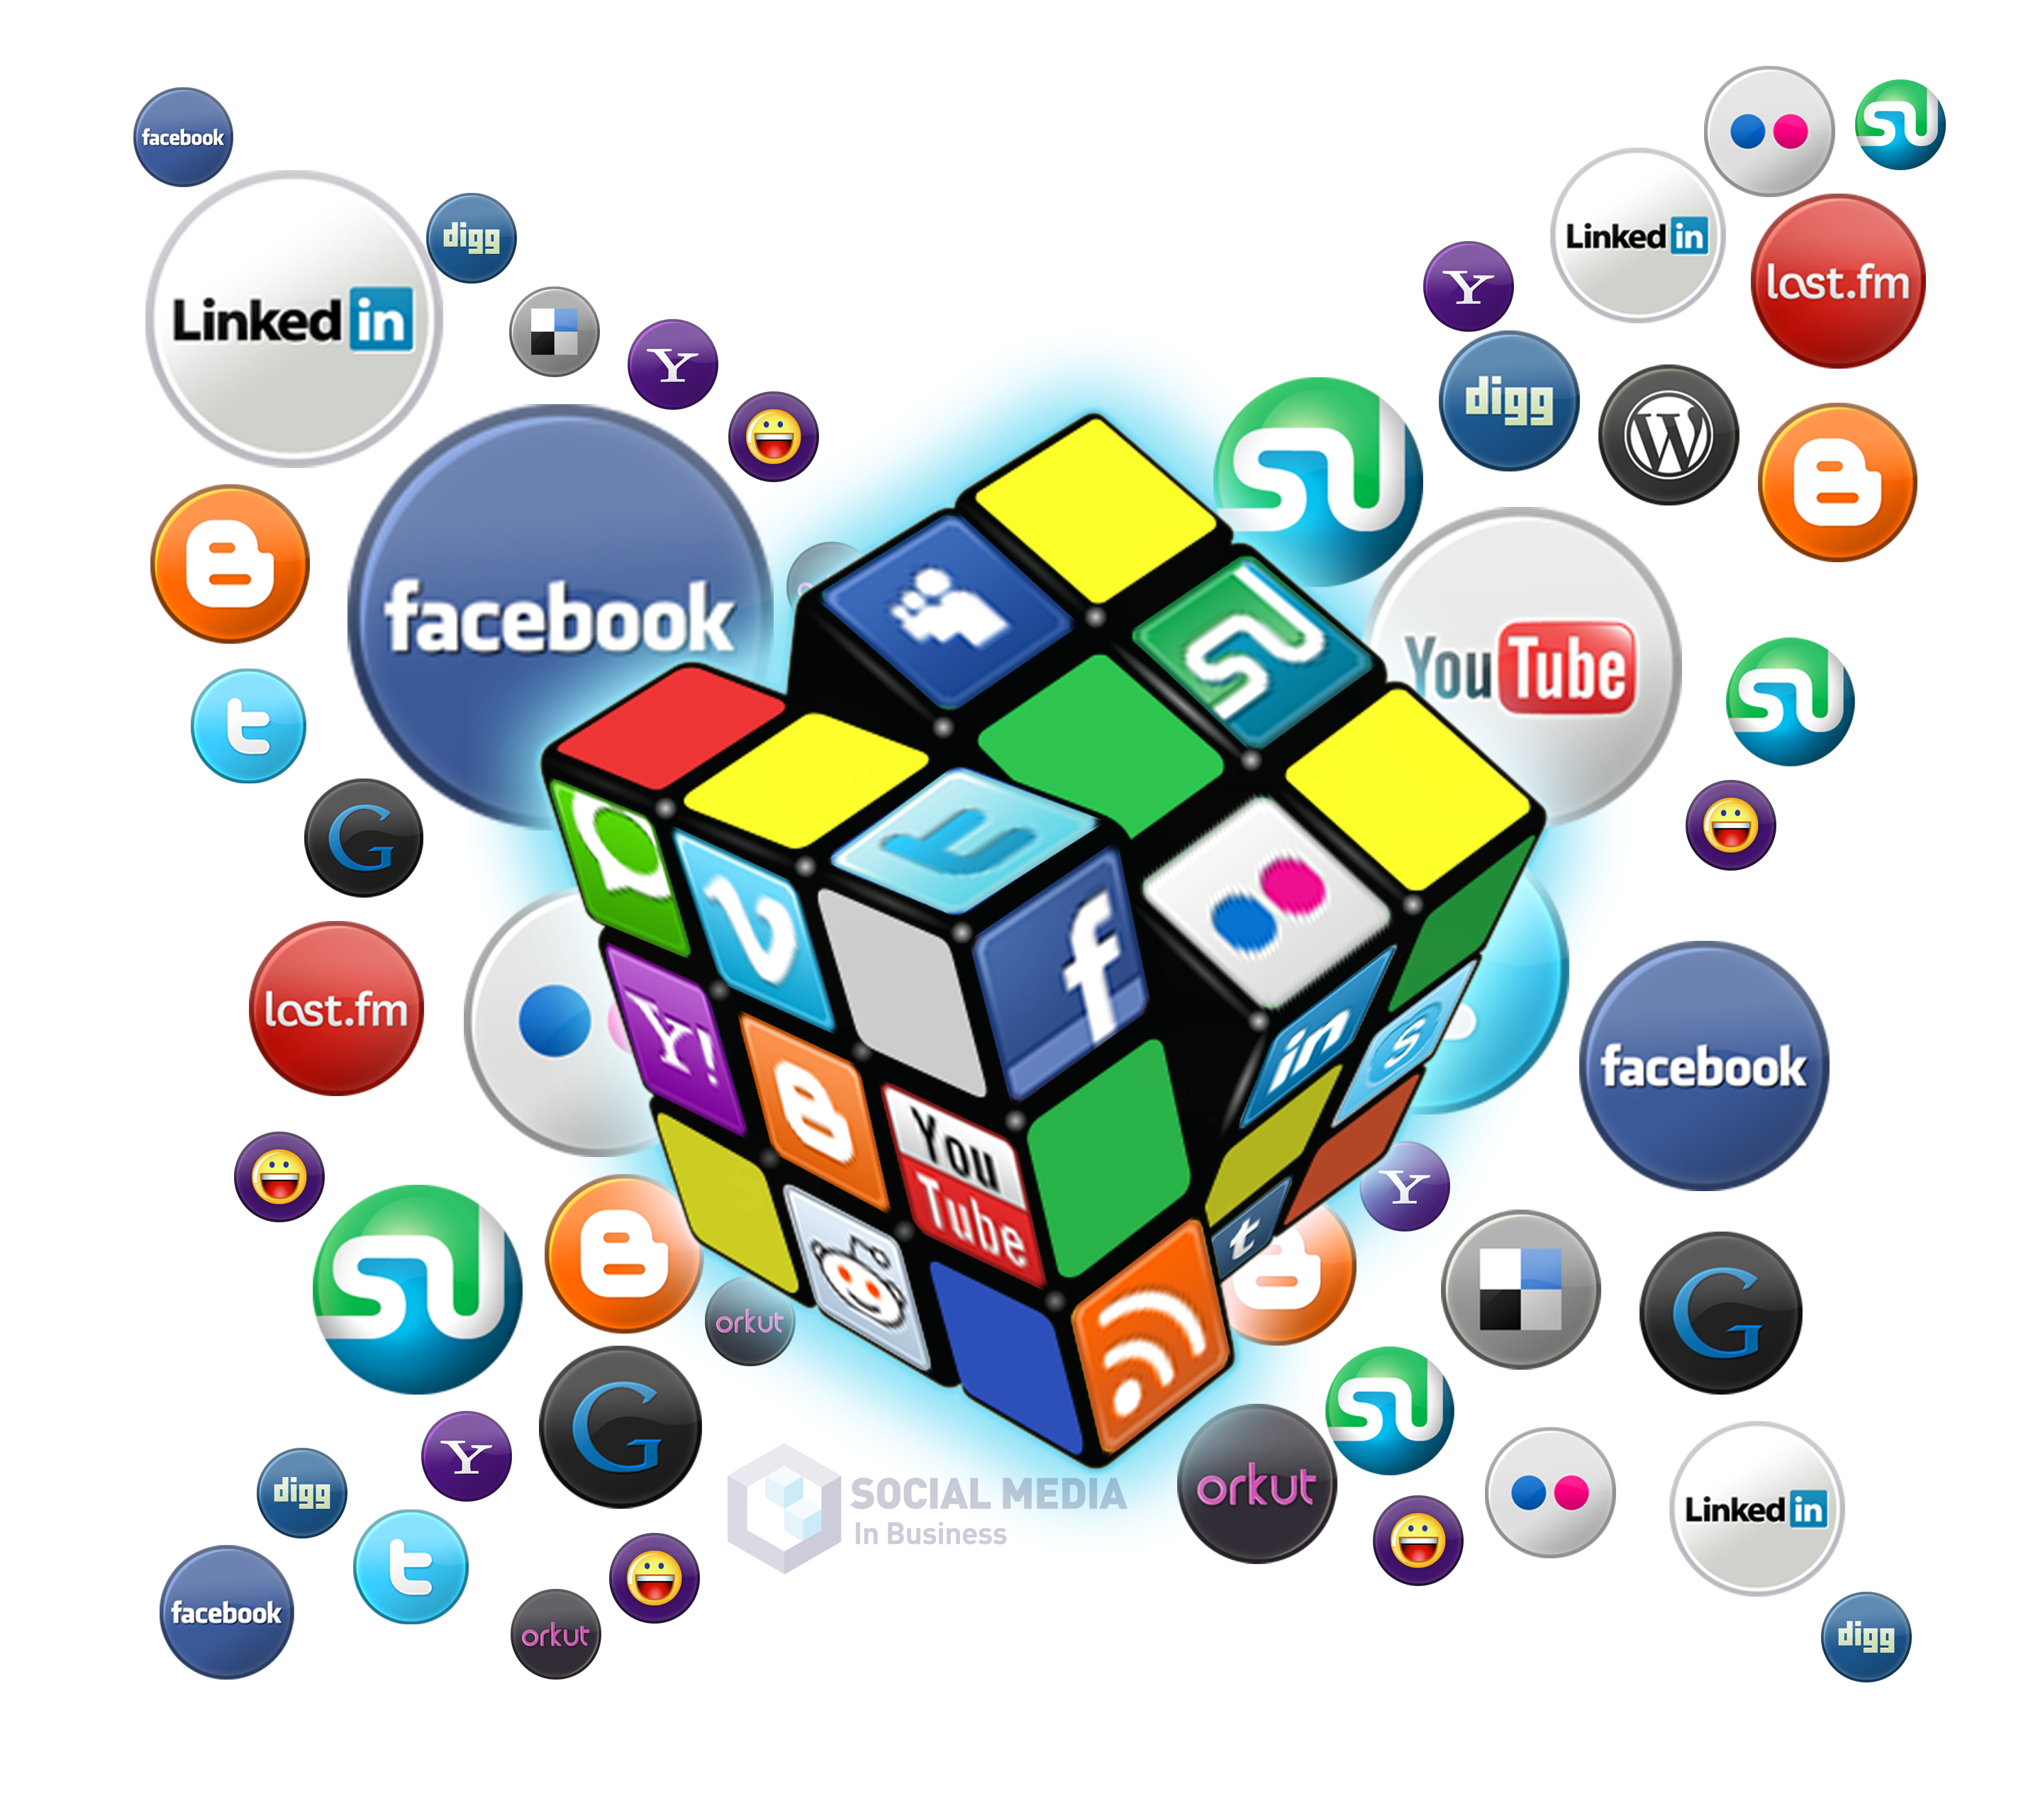 Social media plays a huge role in terms of web traffic and link building strategy.